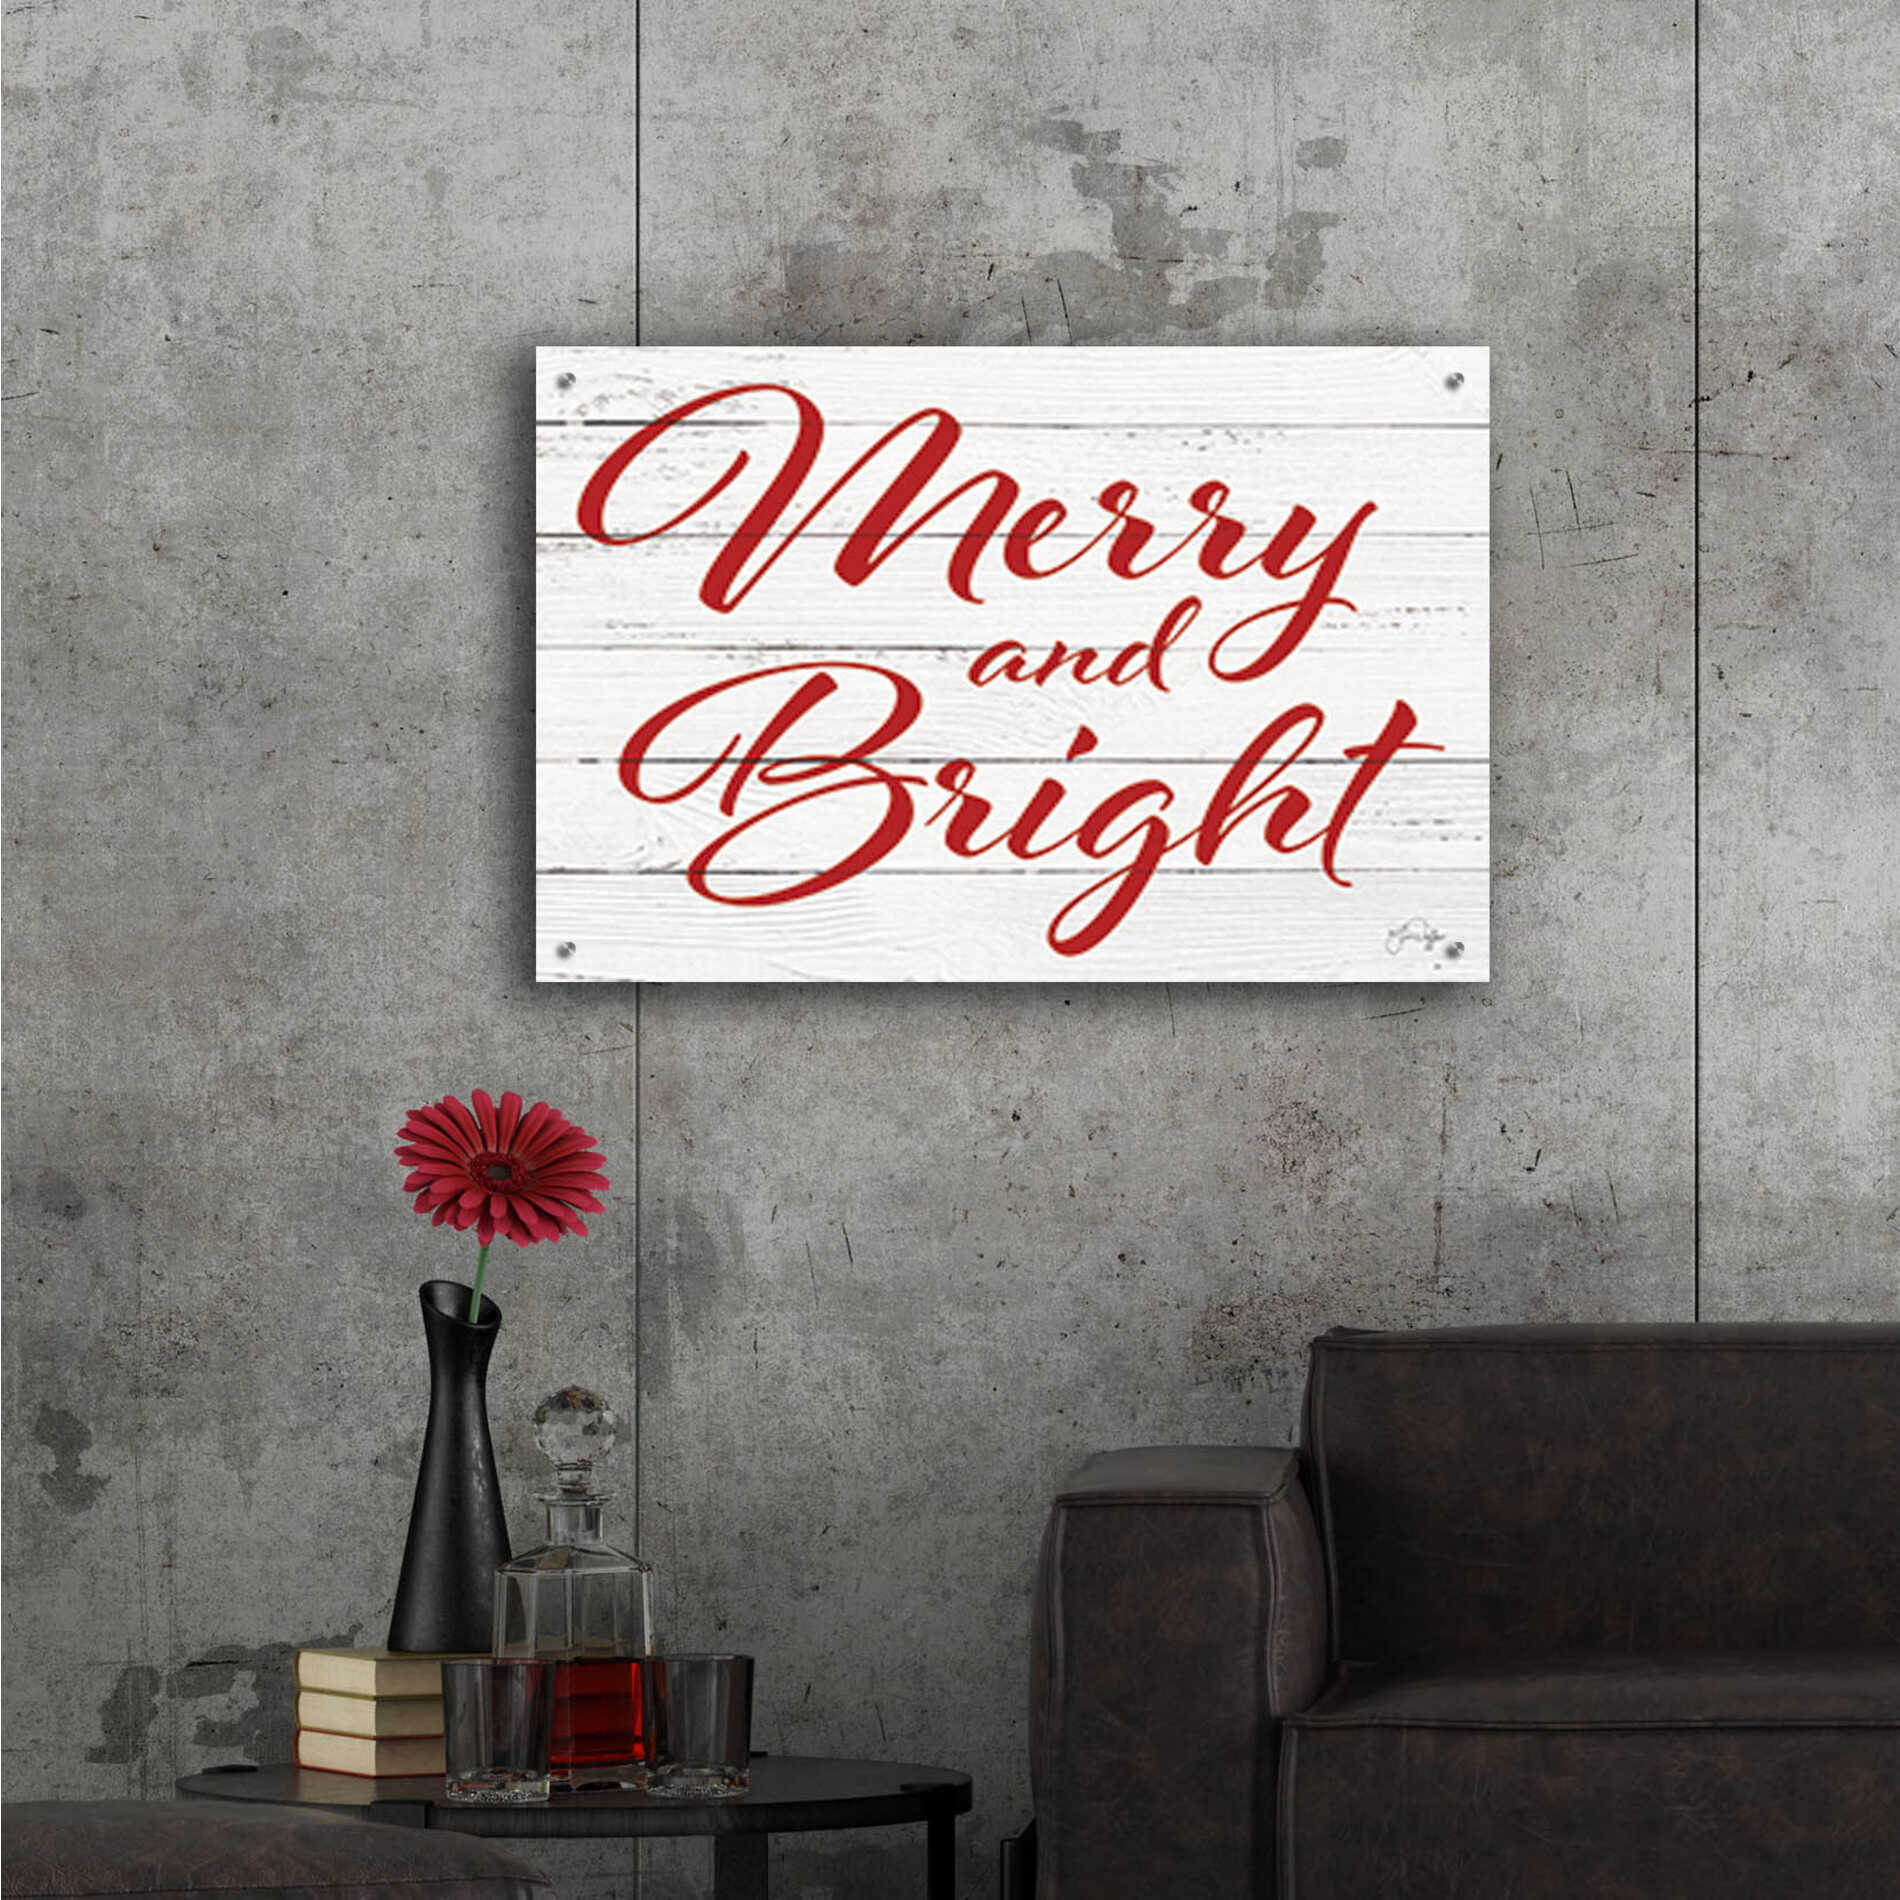 Epic Art 'Merry and Bright' by Yass Naffas Designs, Acrylic Glass Wall Art,36x24